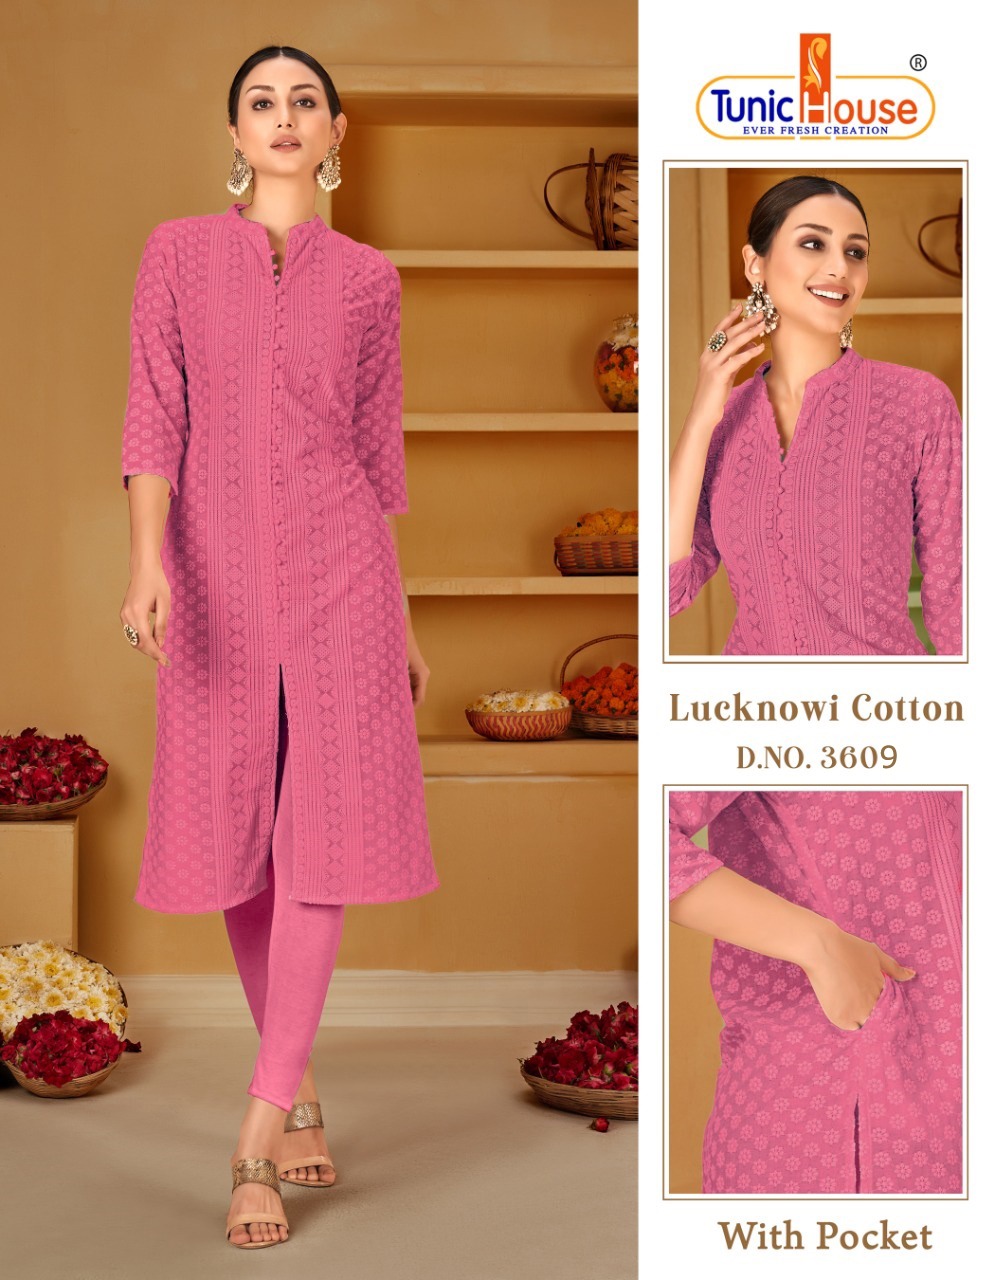 Tunic Houes Lucknowi Cotton collection 2